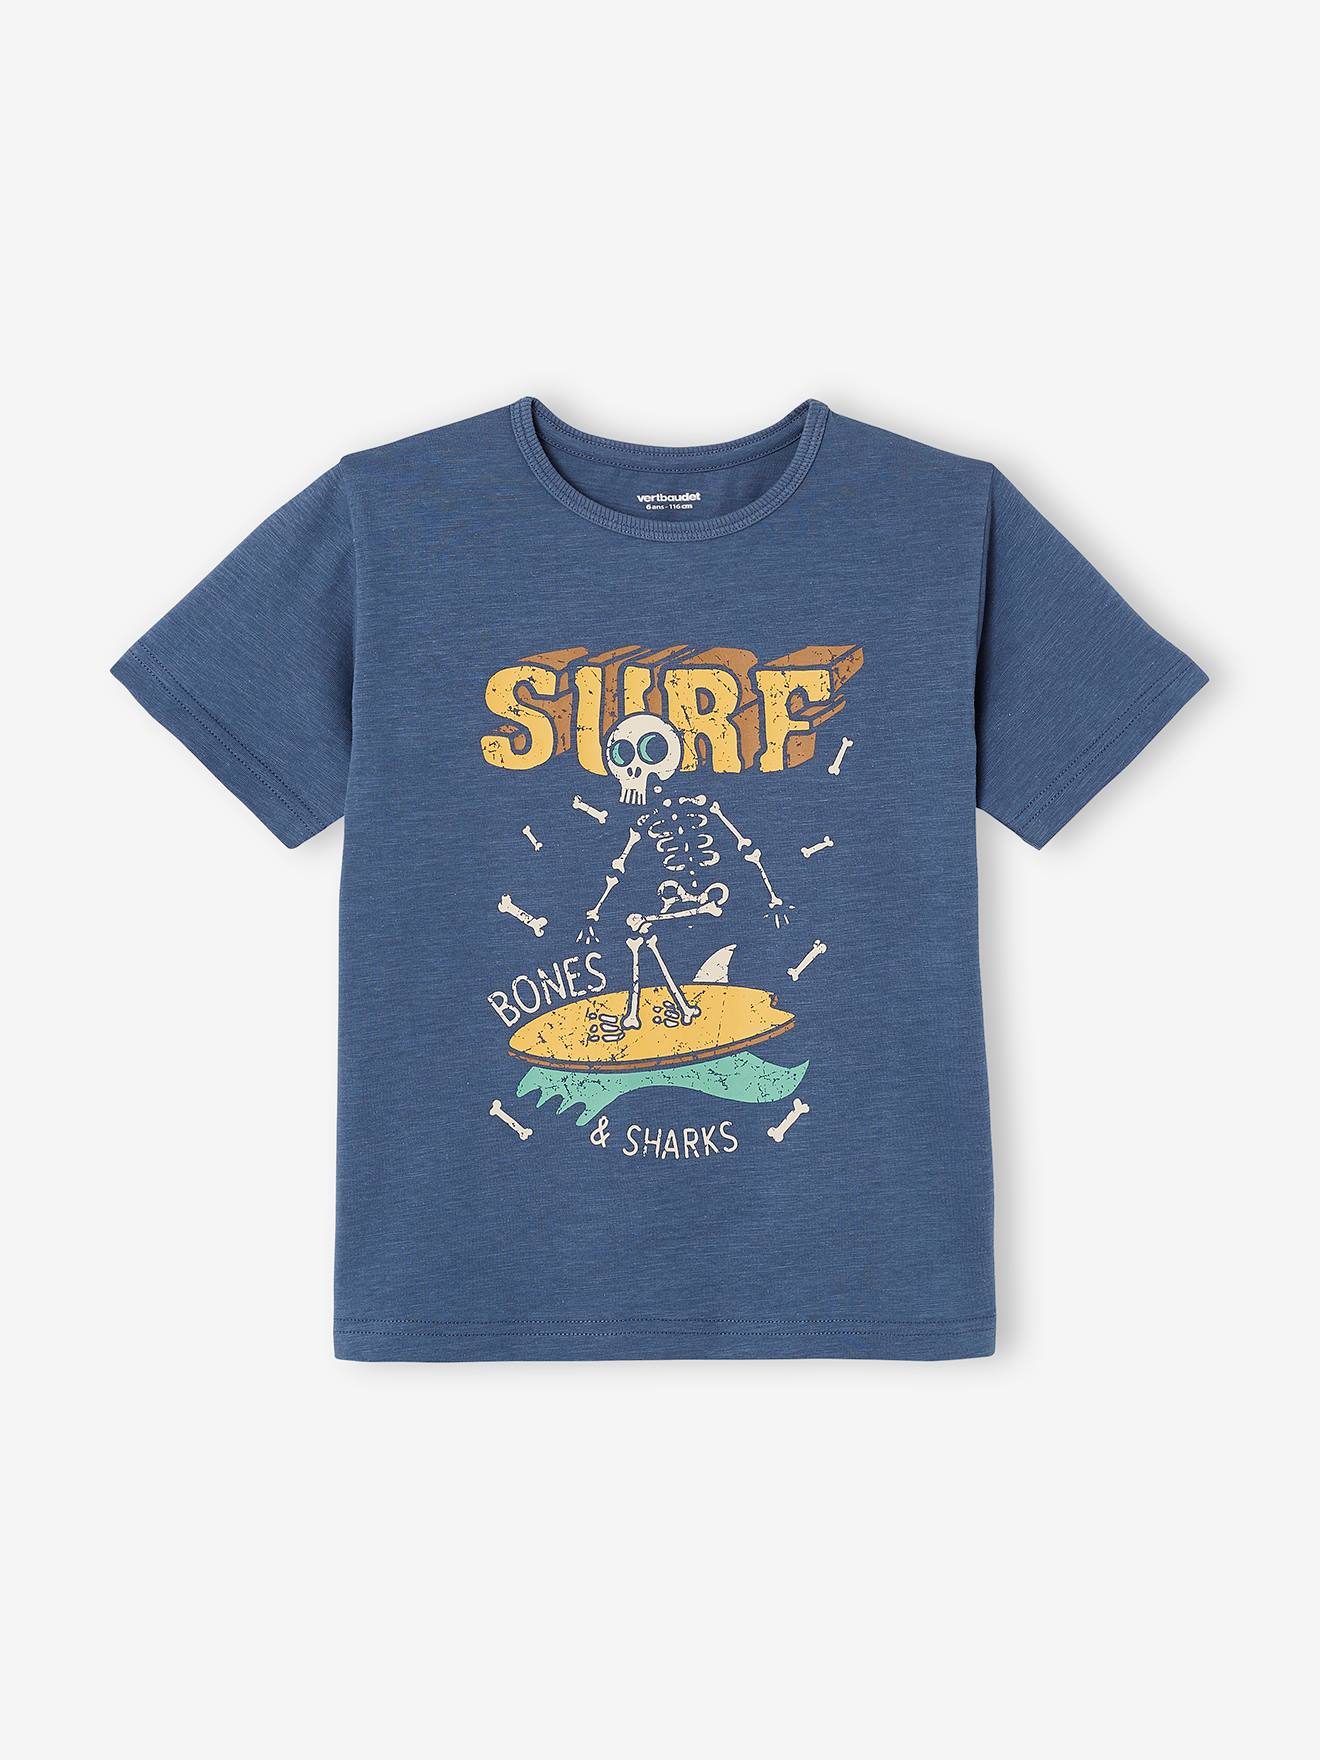 T-Shirt with Graphic Motif for Boys blue dark solid with design